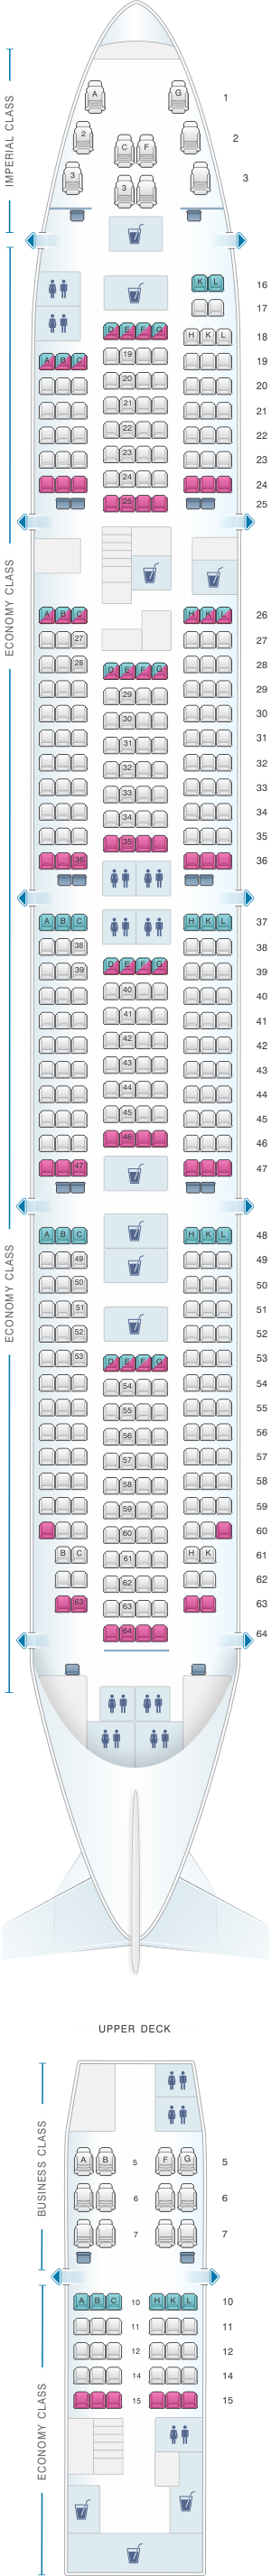 Seat map for Transaero Airlines Boeing B747 400 Config. 4